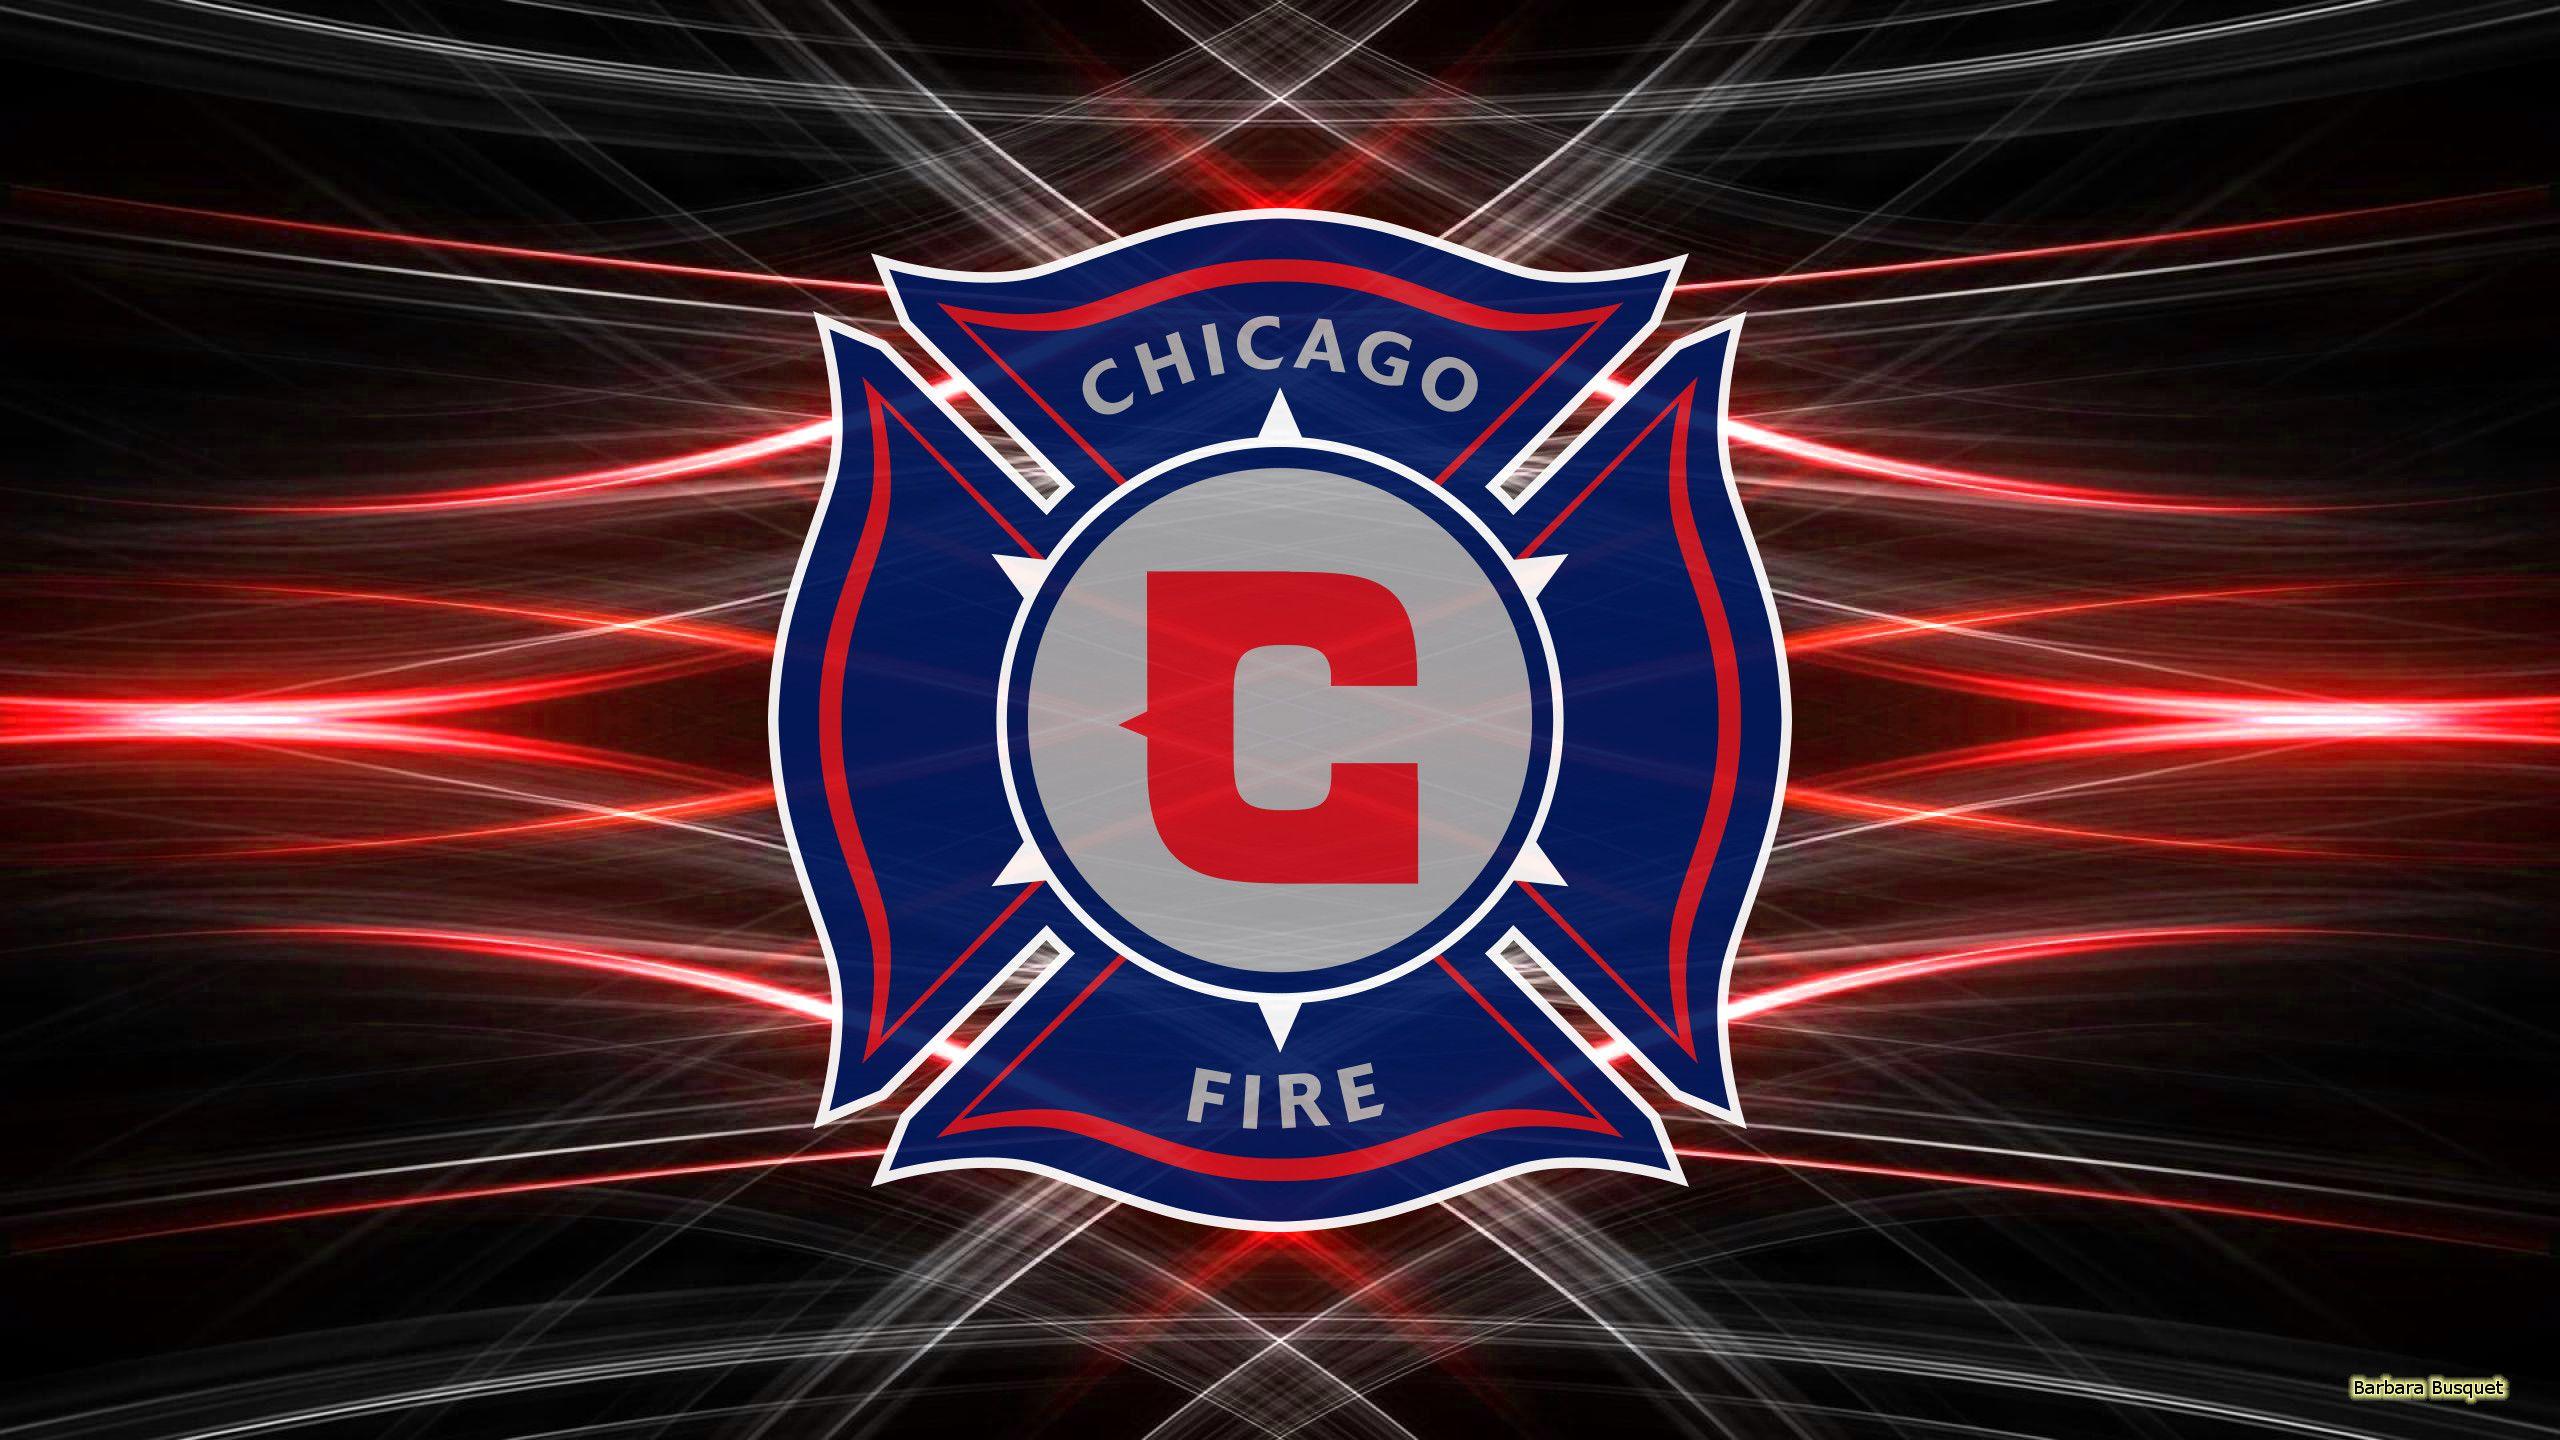 Chicago Fire Soccer Logo - Chicago Fire Soccer Club | Barbaras HD Wallpapers